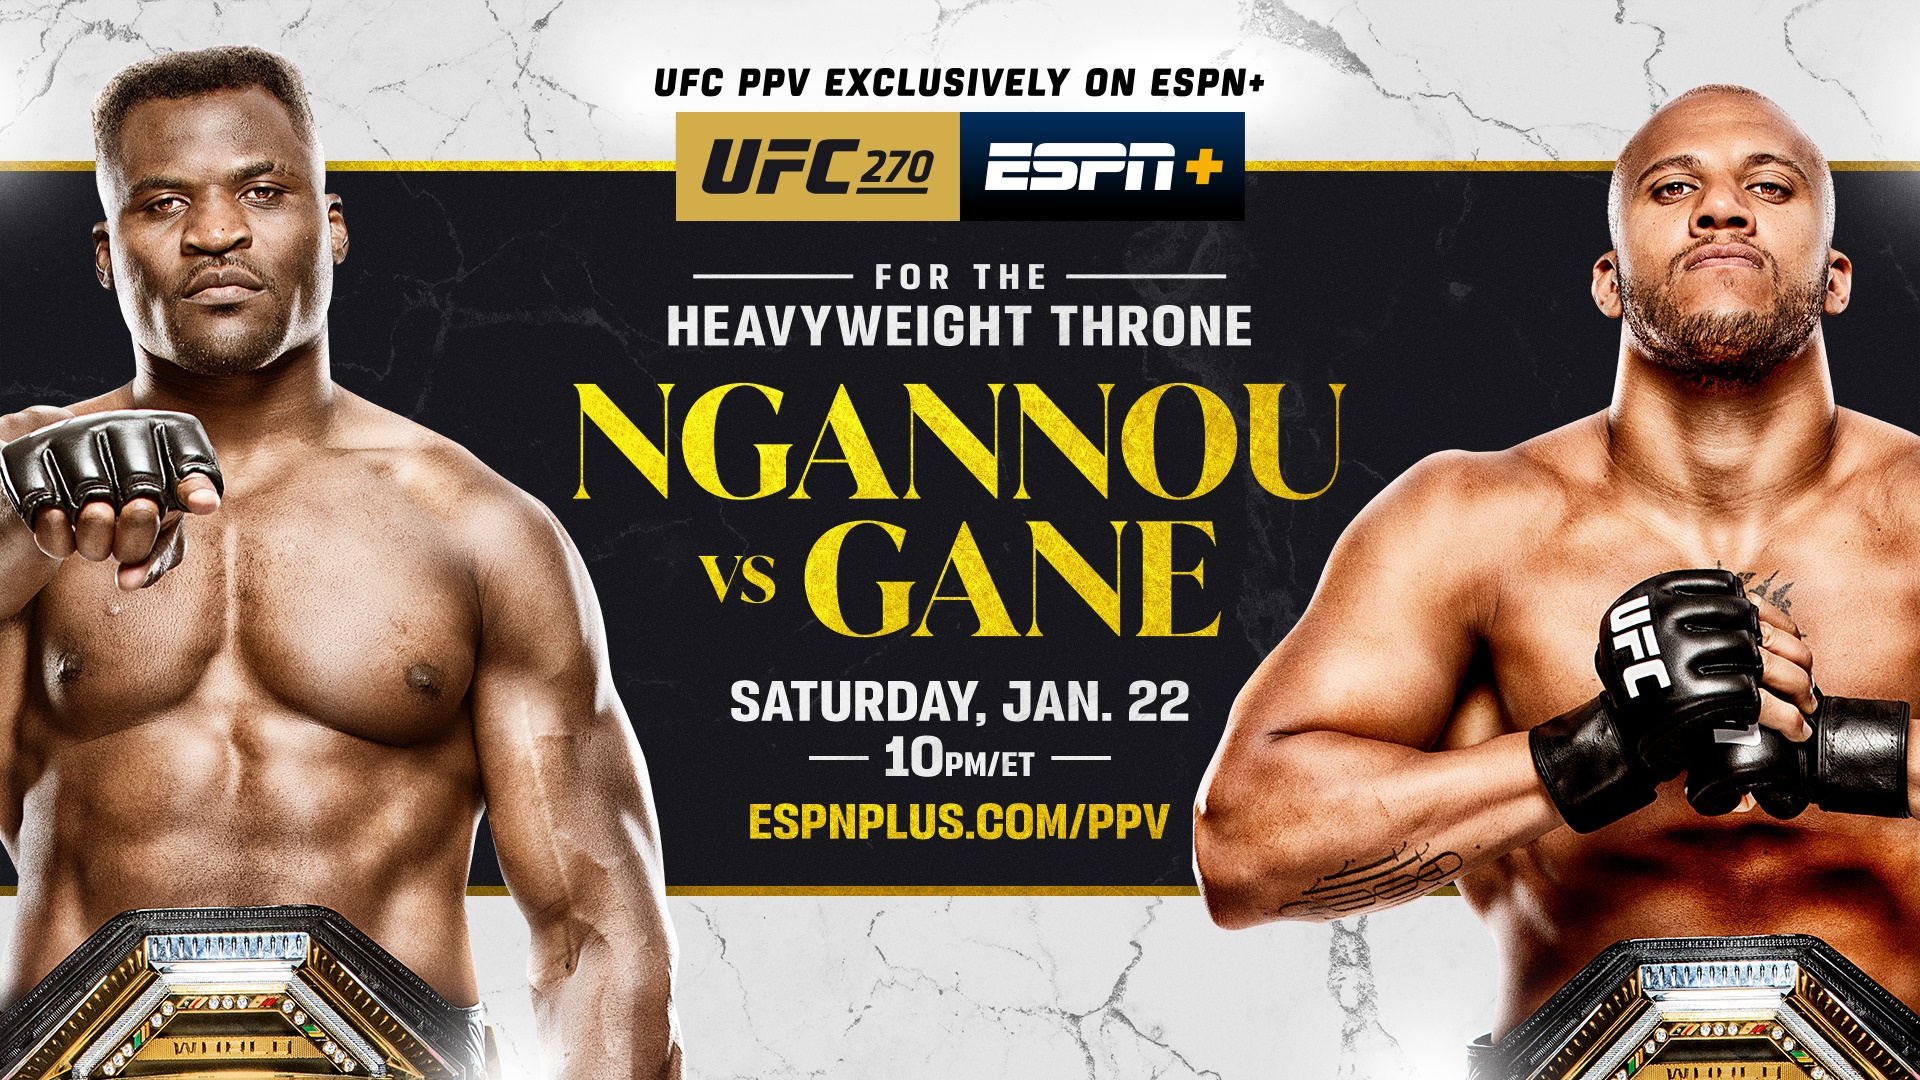 A UFC 270 graphic is shown with Ngannou and Gane.